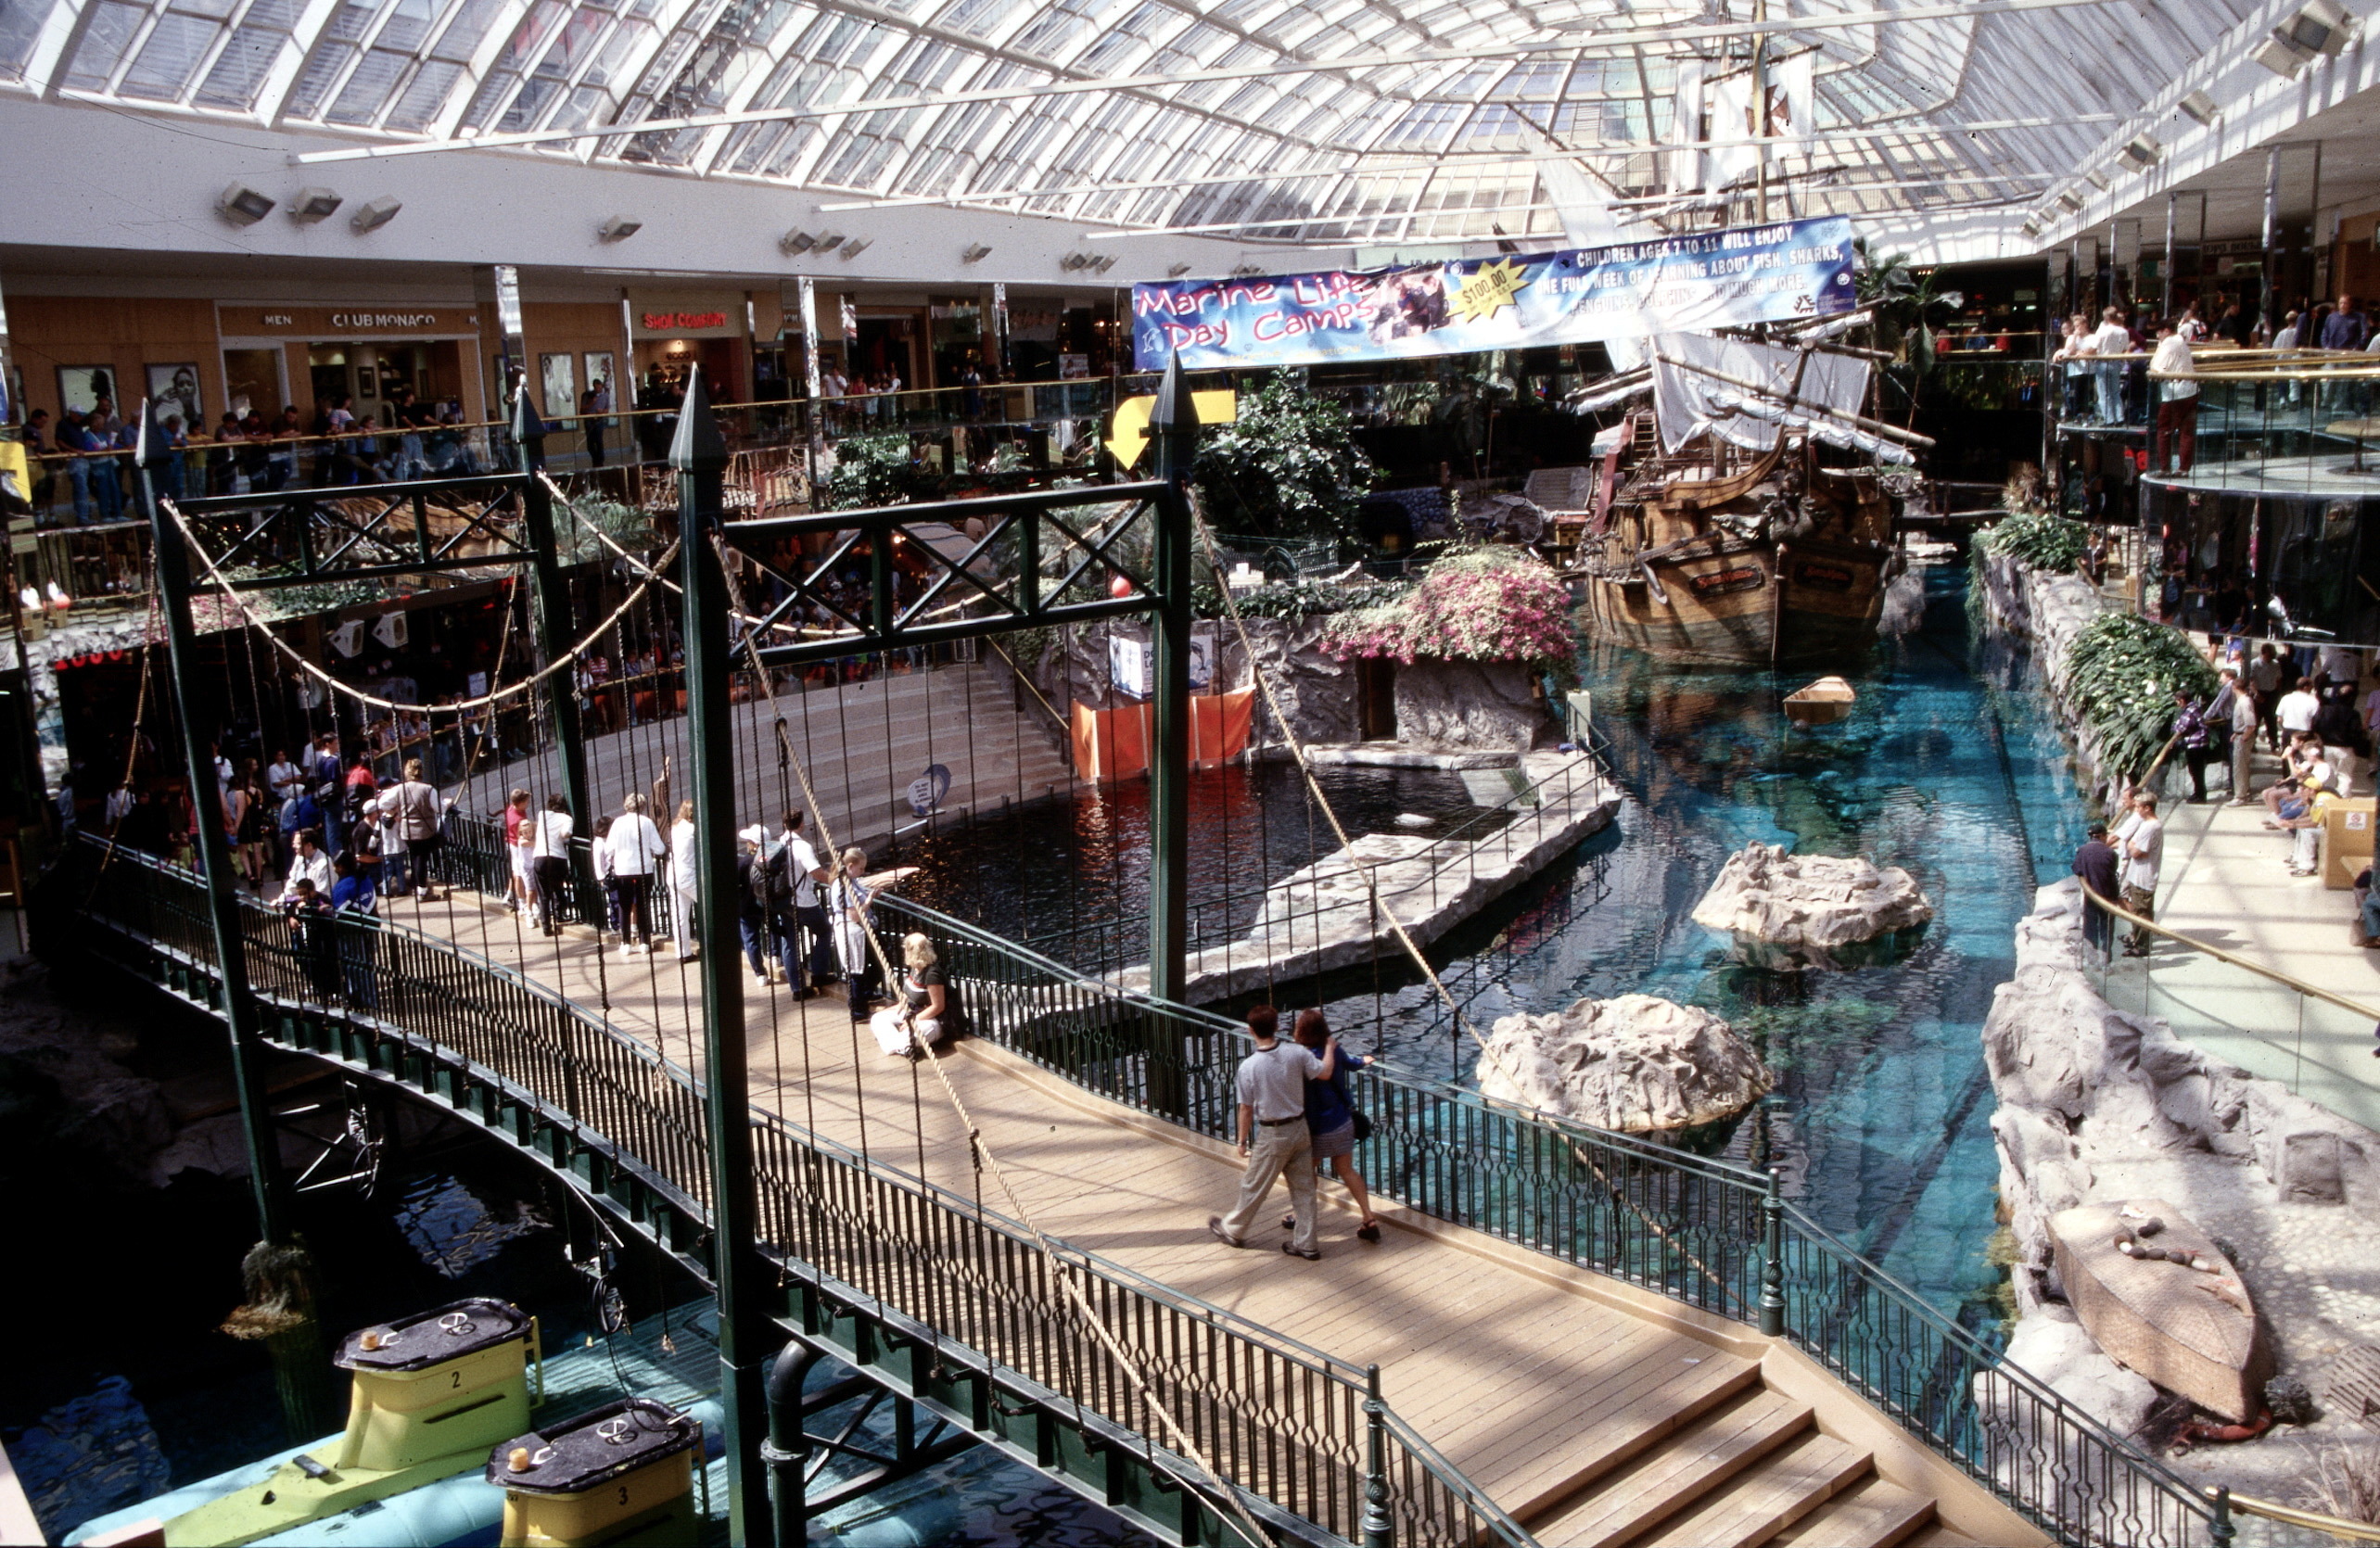 Retail Profile: West Edmonton Mall Phase 1 and Phase 2 During COVID-19